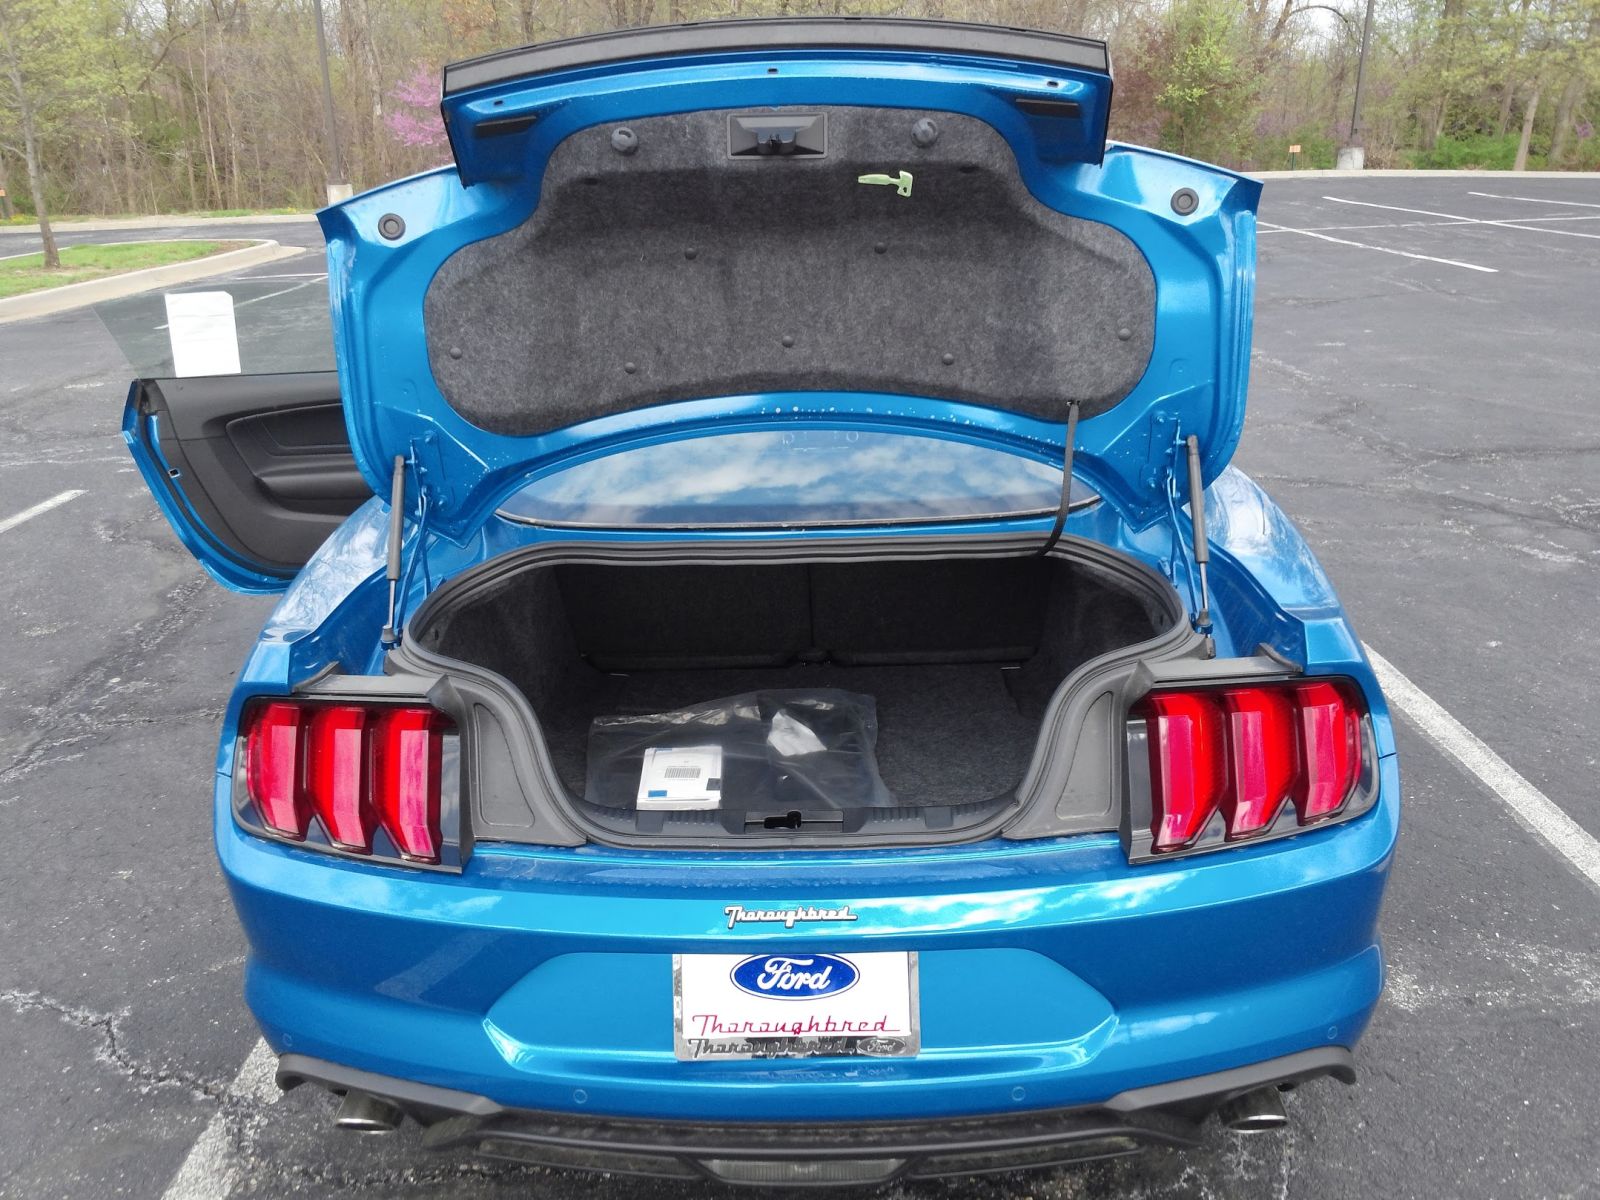 Illustration for article titled I Test Drove An EcoBoost Mustang. It is in fact, not a Mustang II